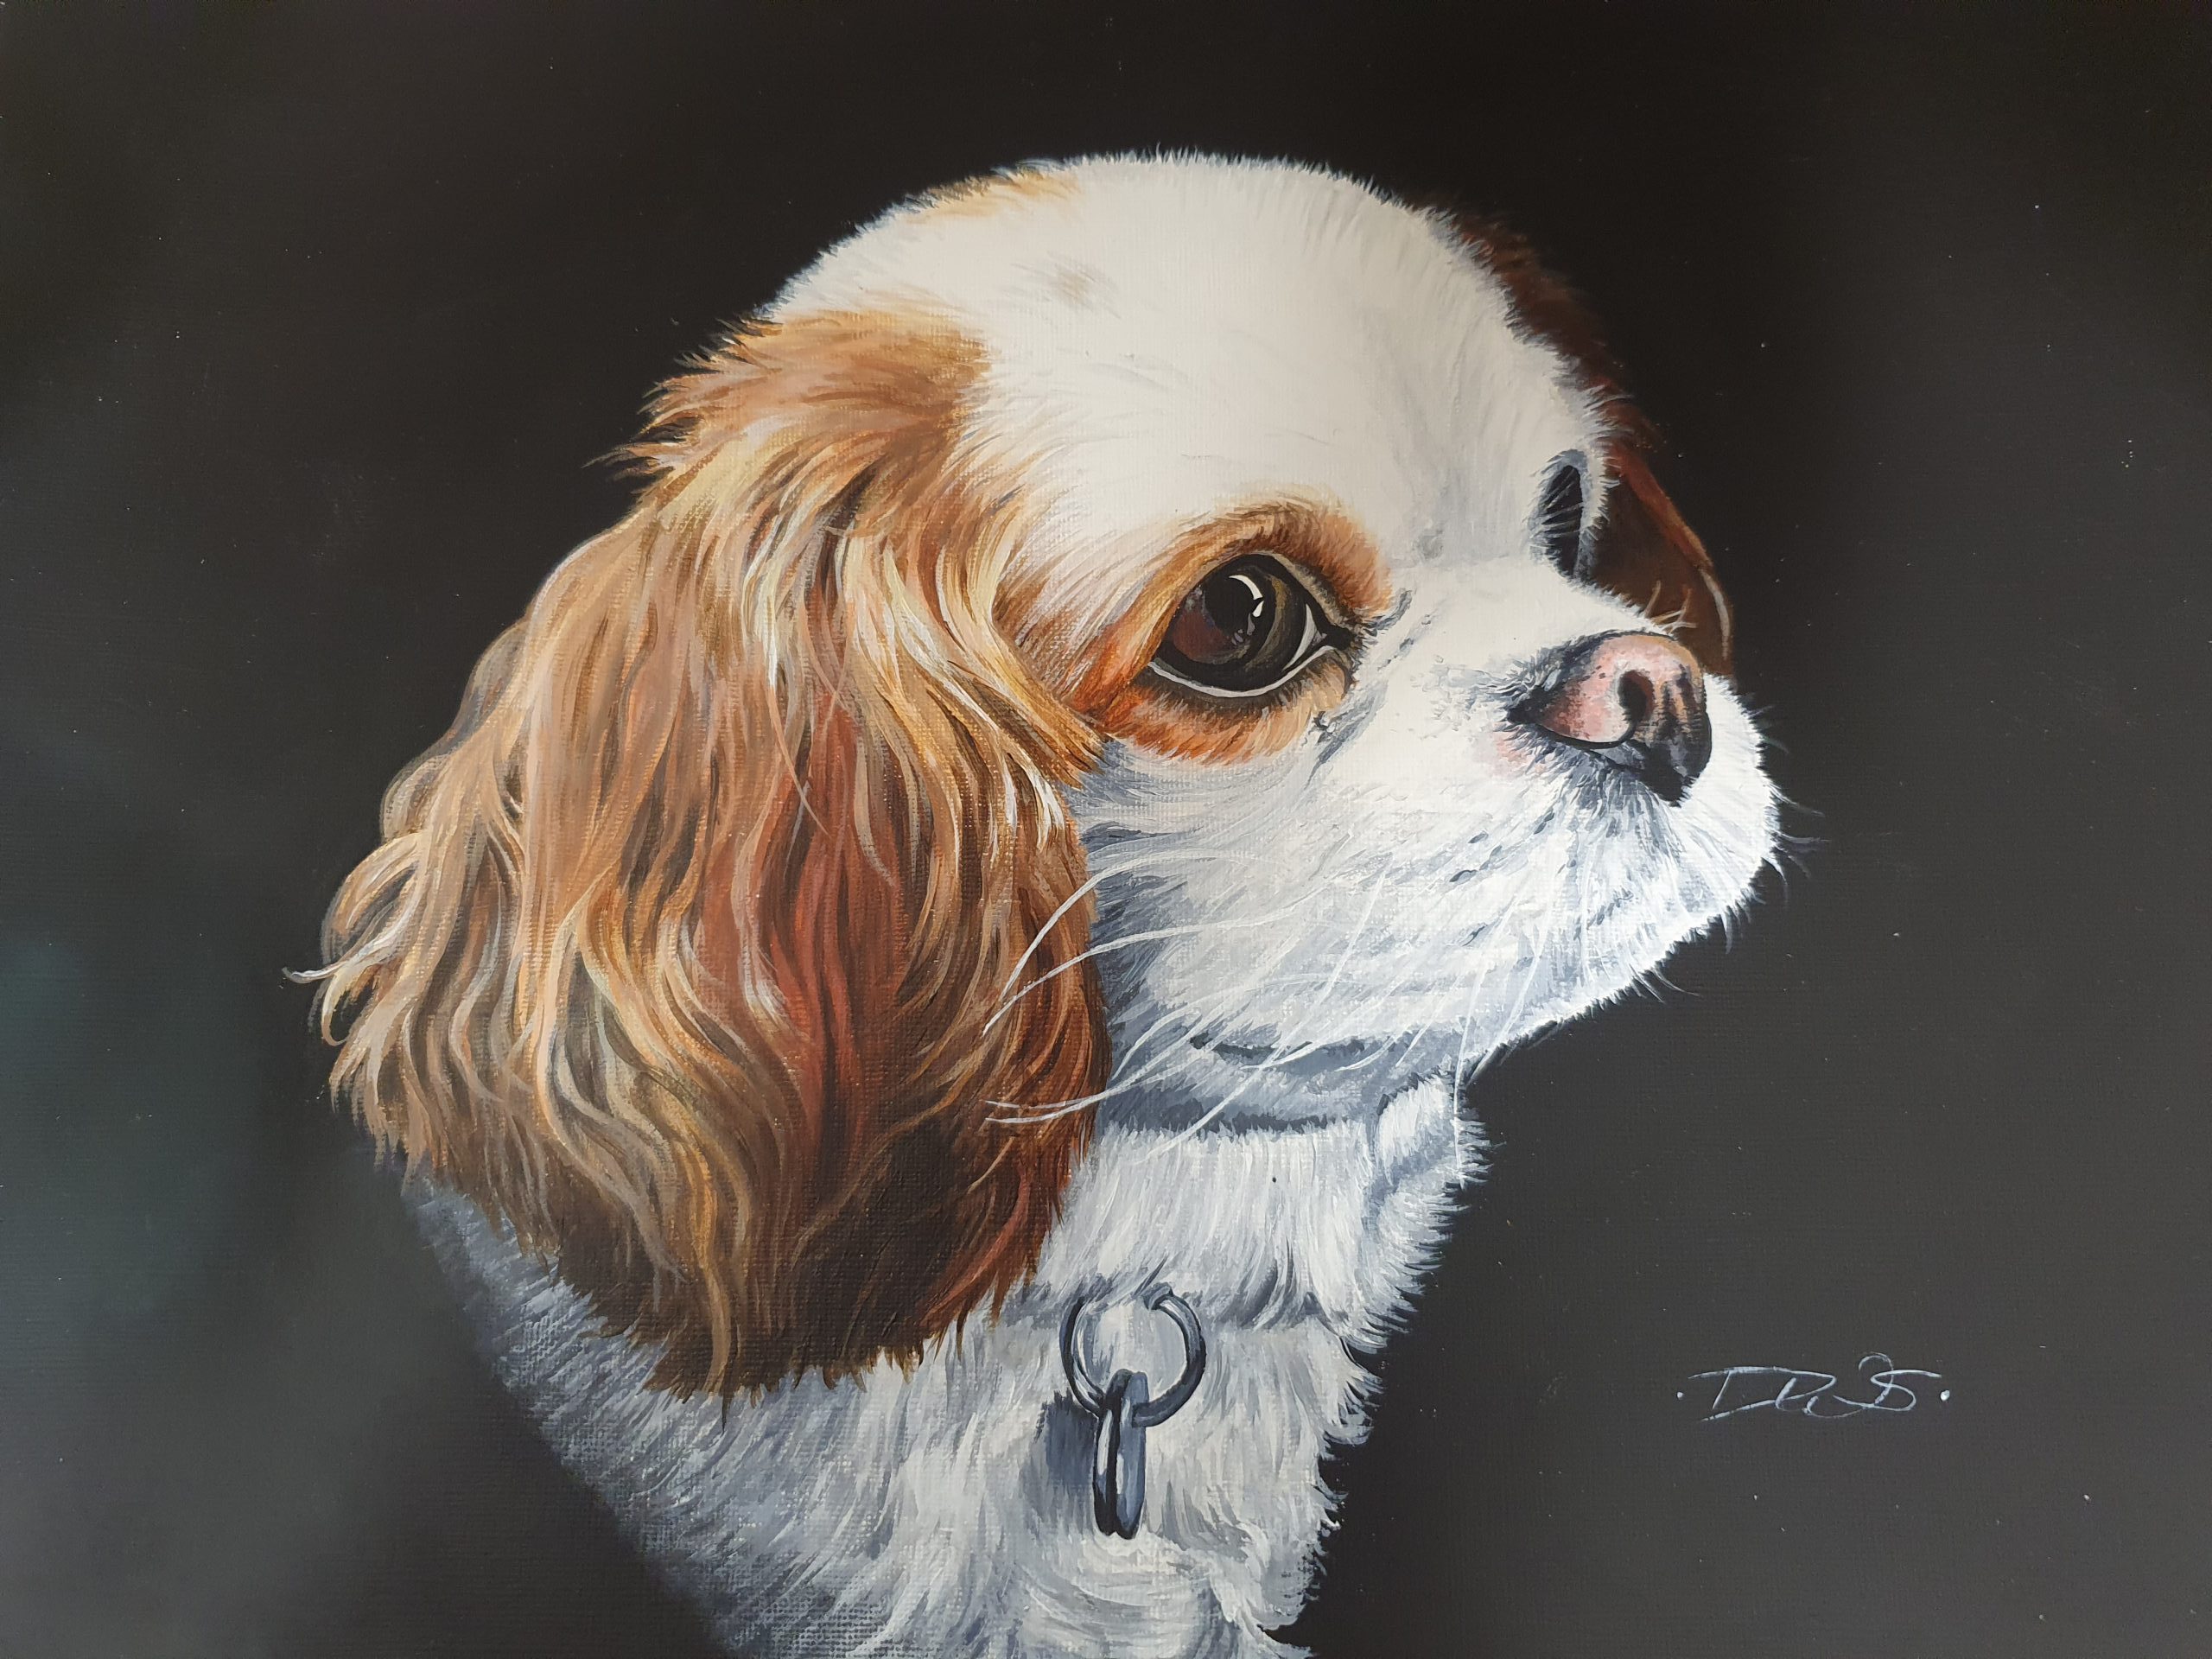 Painting commission by Dr Donna Winderbank-Scott - Caviler King Charles Spaniel, Acrylic on Board 2020